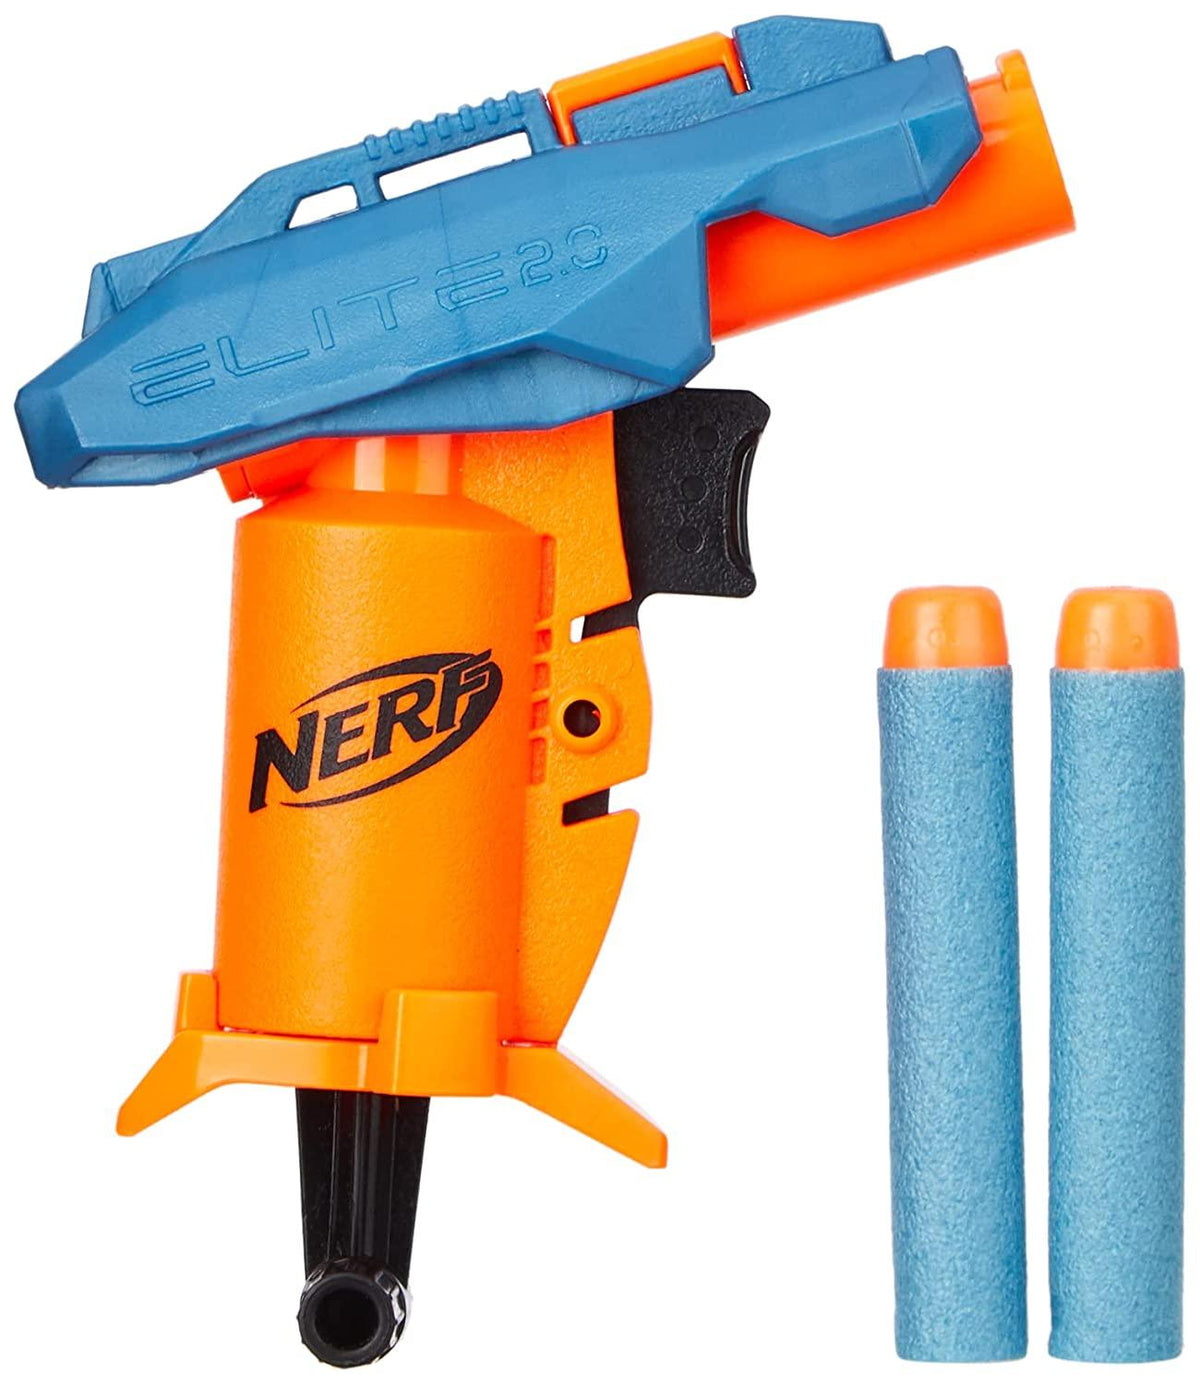 Nerf Elite 2.0 Slash Blaster, Includes 2 Nerf Elite Darts, Pull to Prime Handle, Toy Foam Blaster for Outdoor Kids Games - FunCorp India